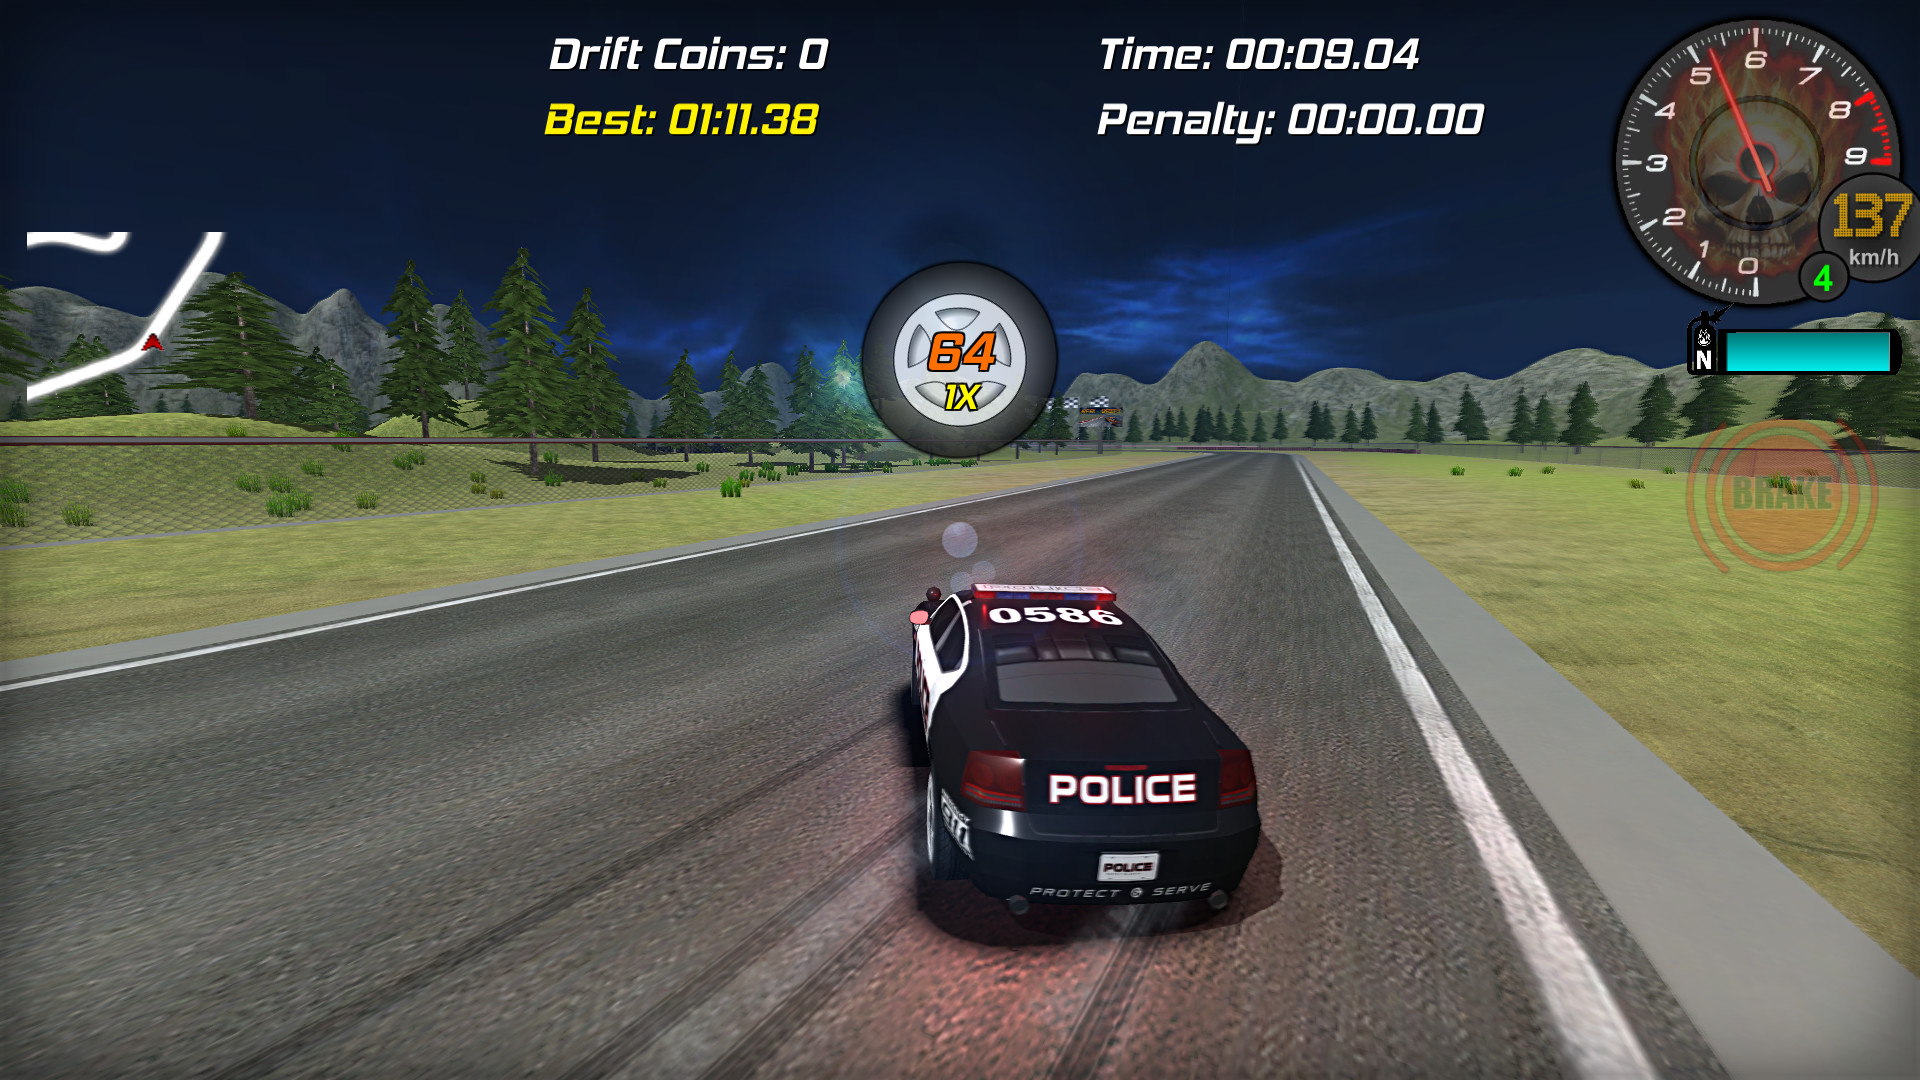 Real Drift Multiplayer - Play Real Drift Multiplayer Game online at Poki 2